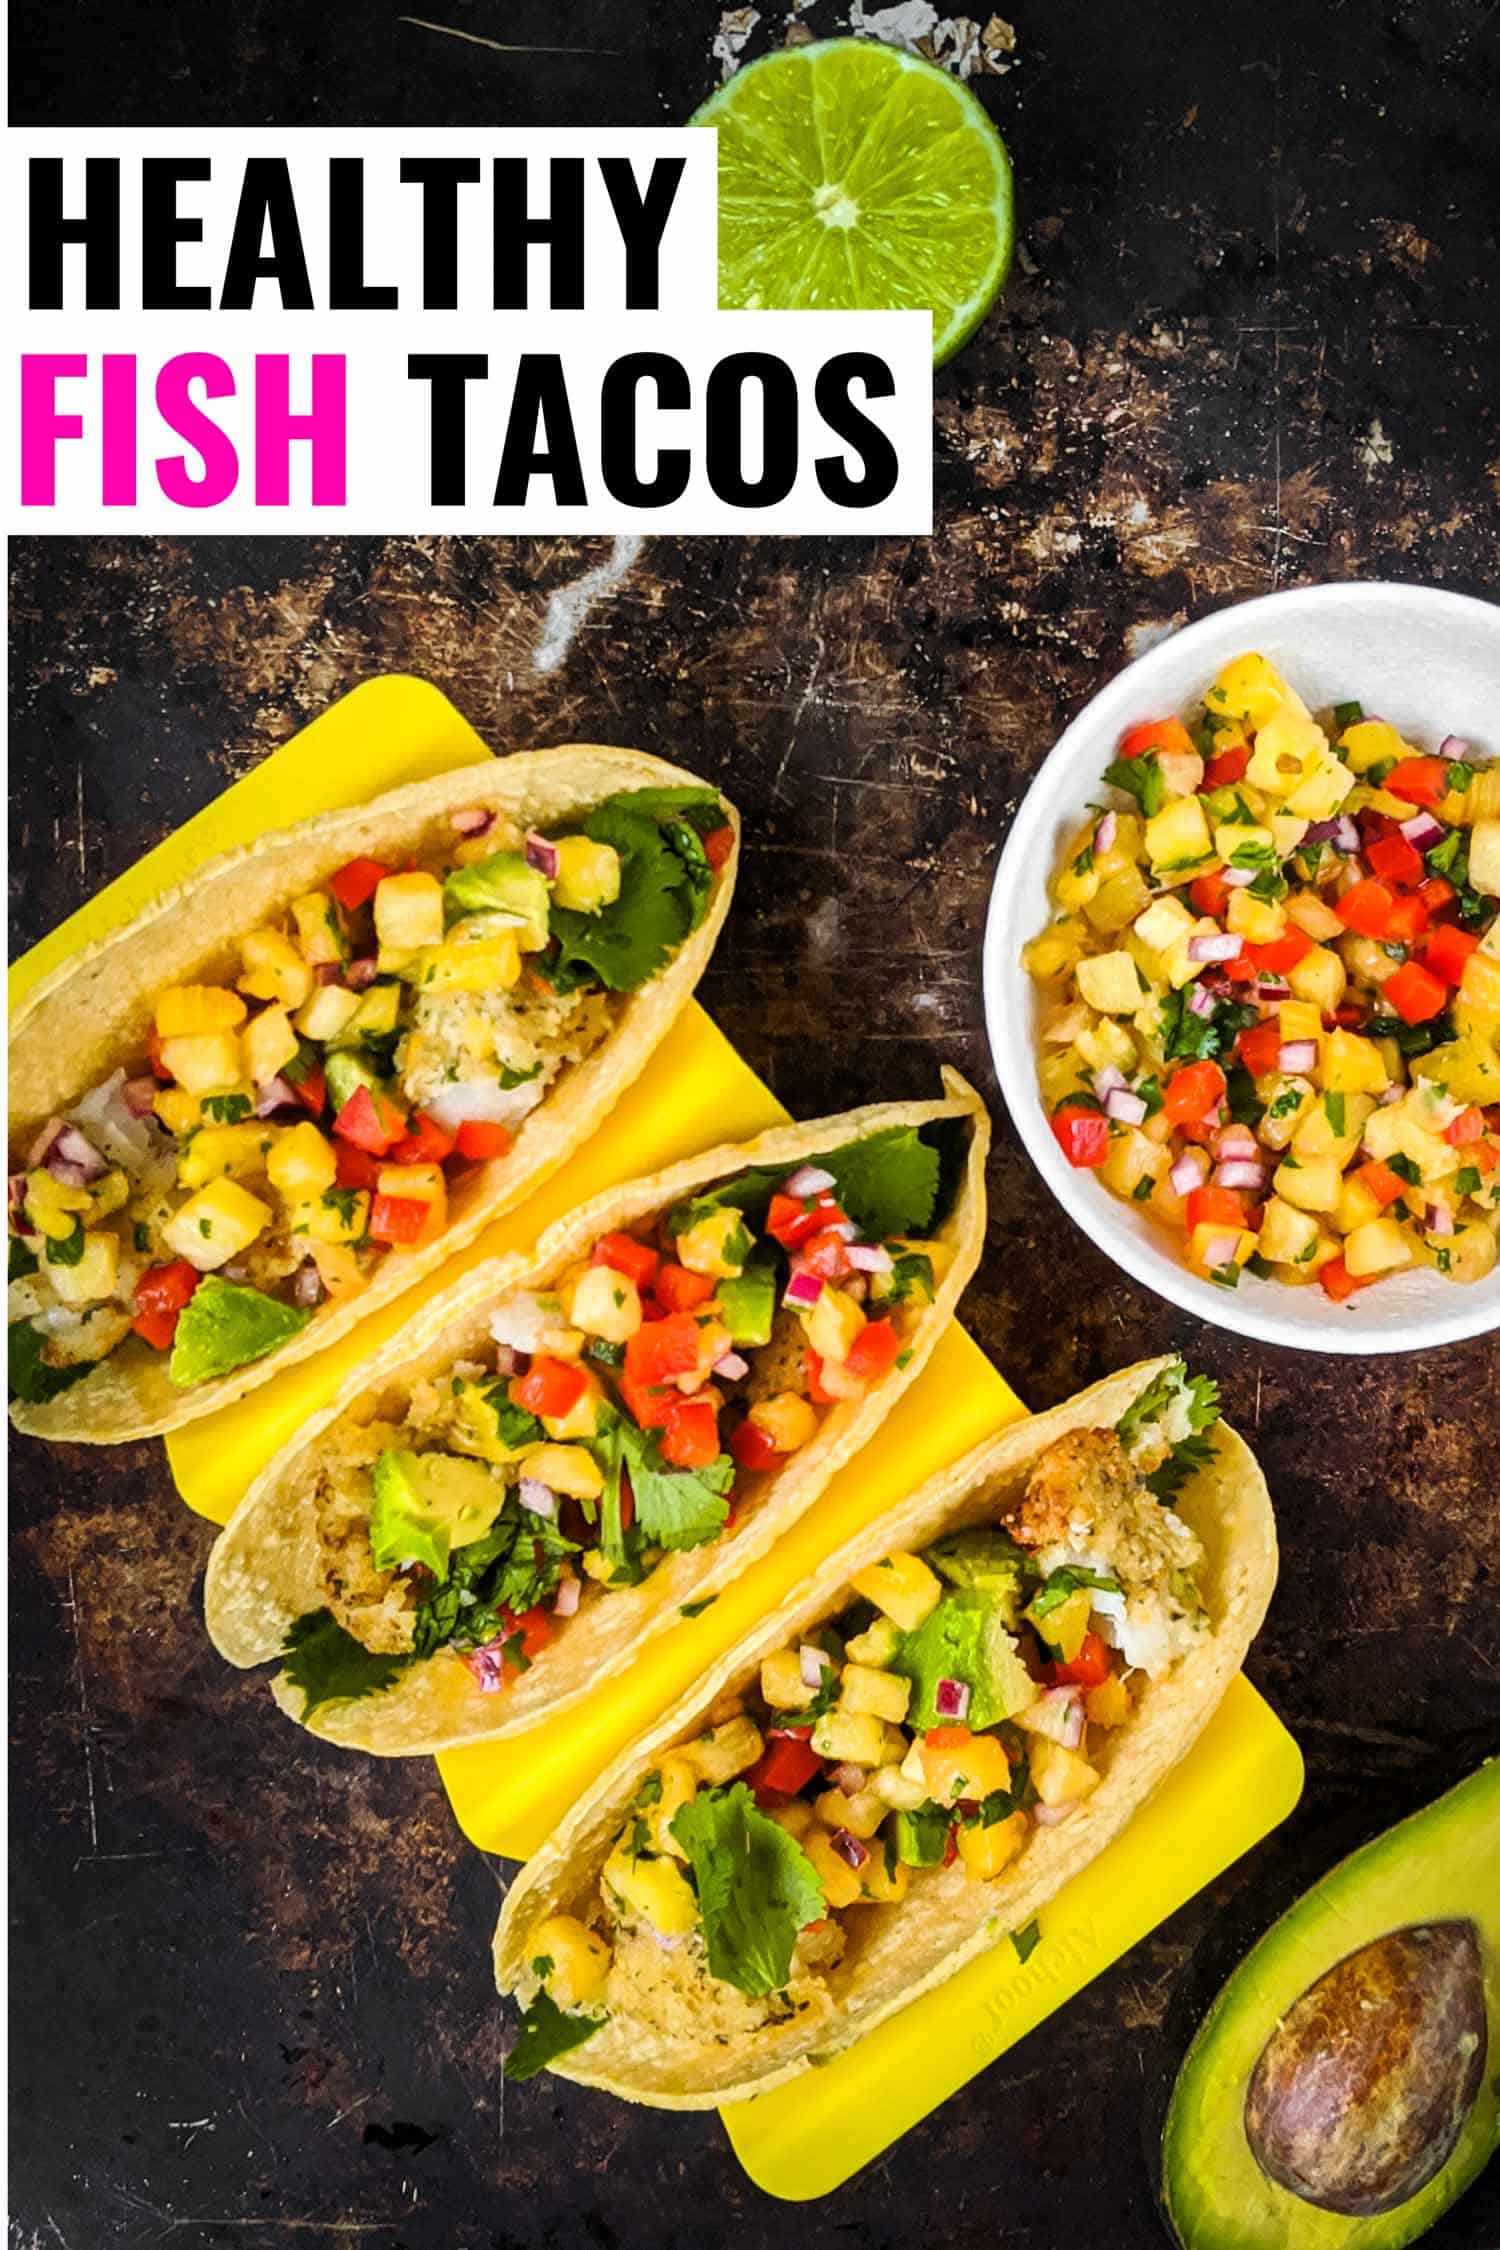 Healthy fish tacos with pineapple red pepper salsa on a dark background